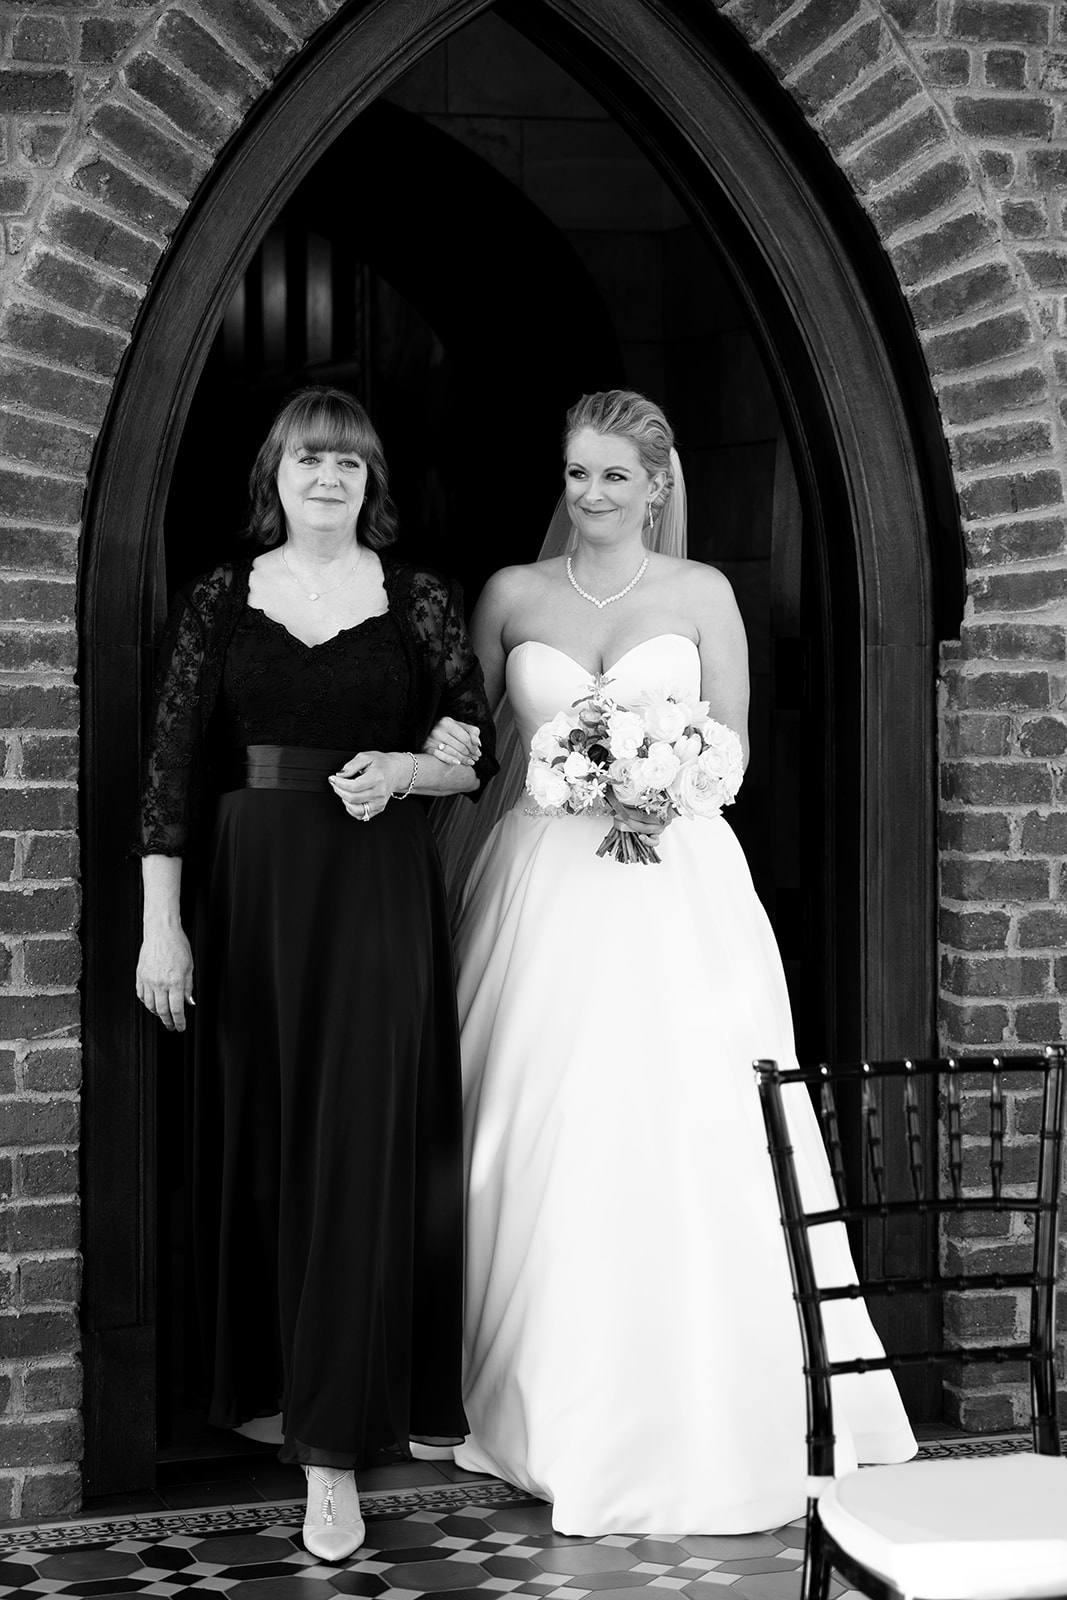 Claire  Ryans Intimate Wedding at Dover Hall - Image Property of www.j-dphoto.com